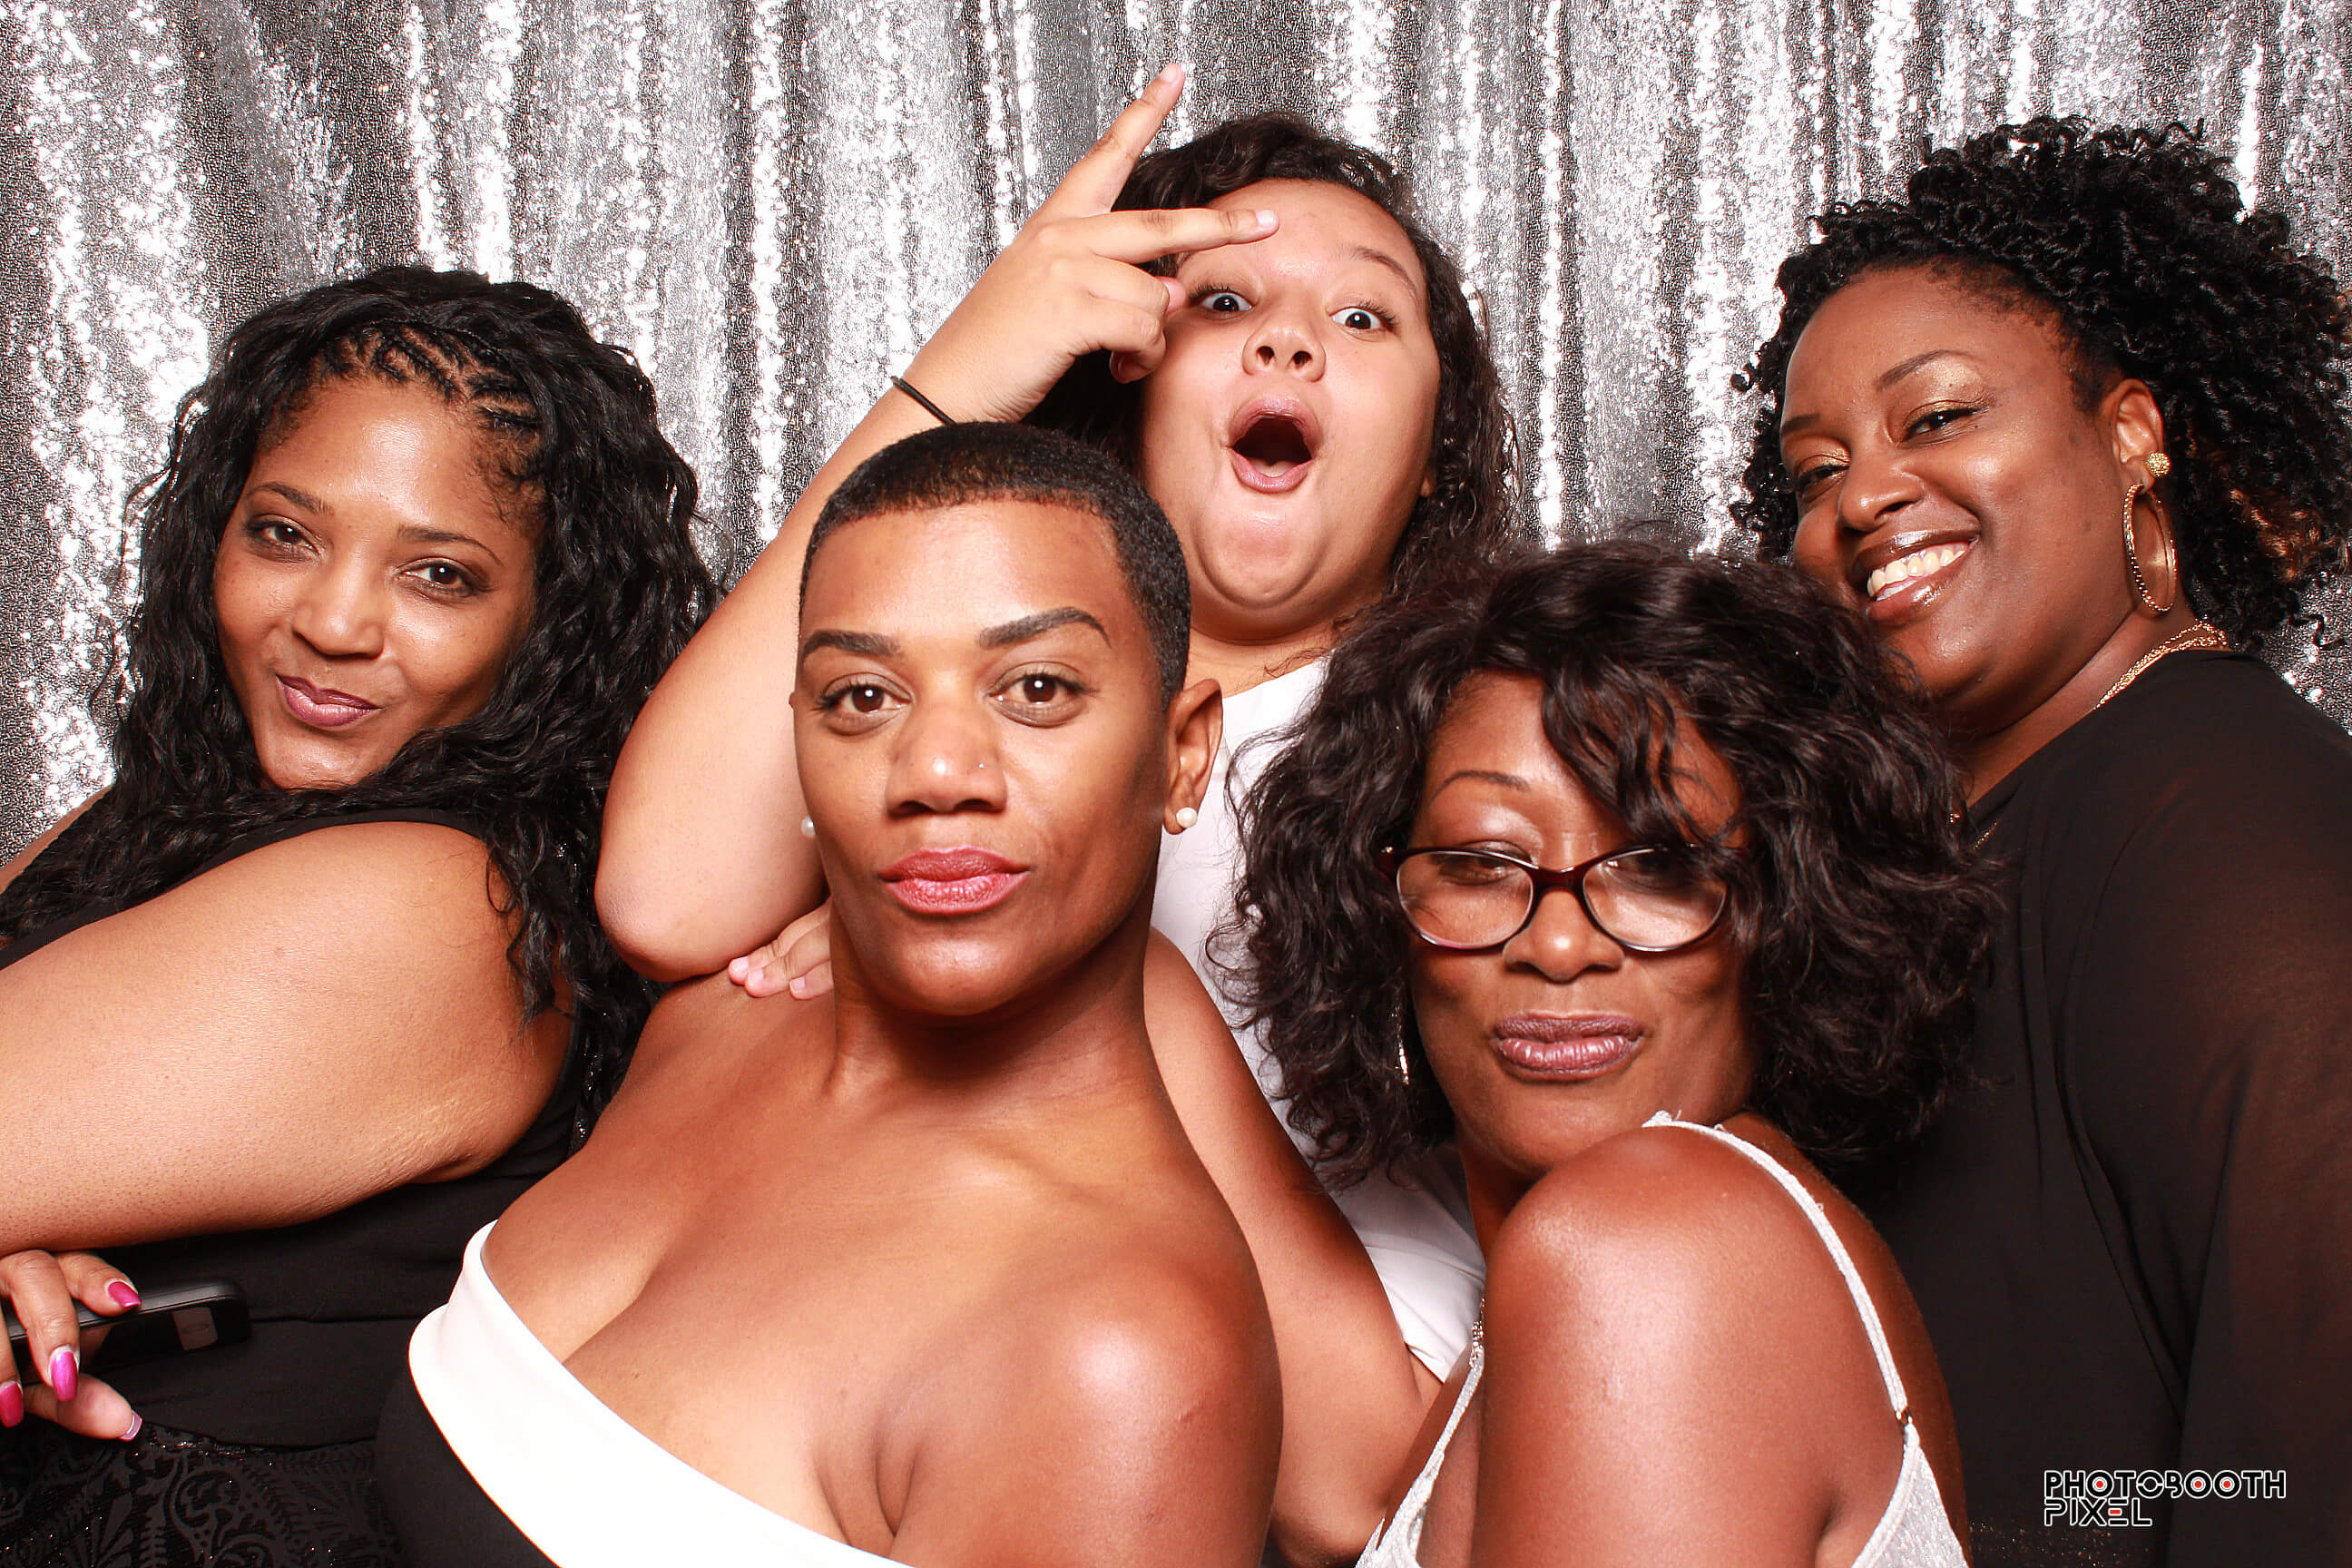 photo booth rental the white room st augustine fl